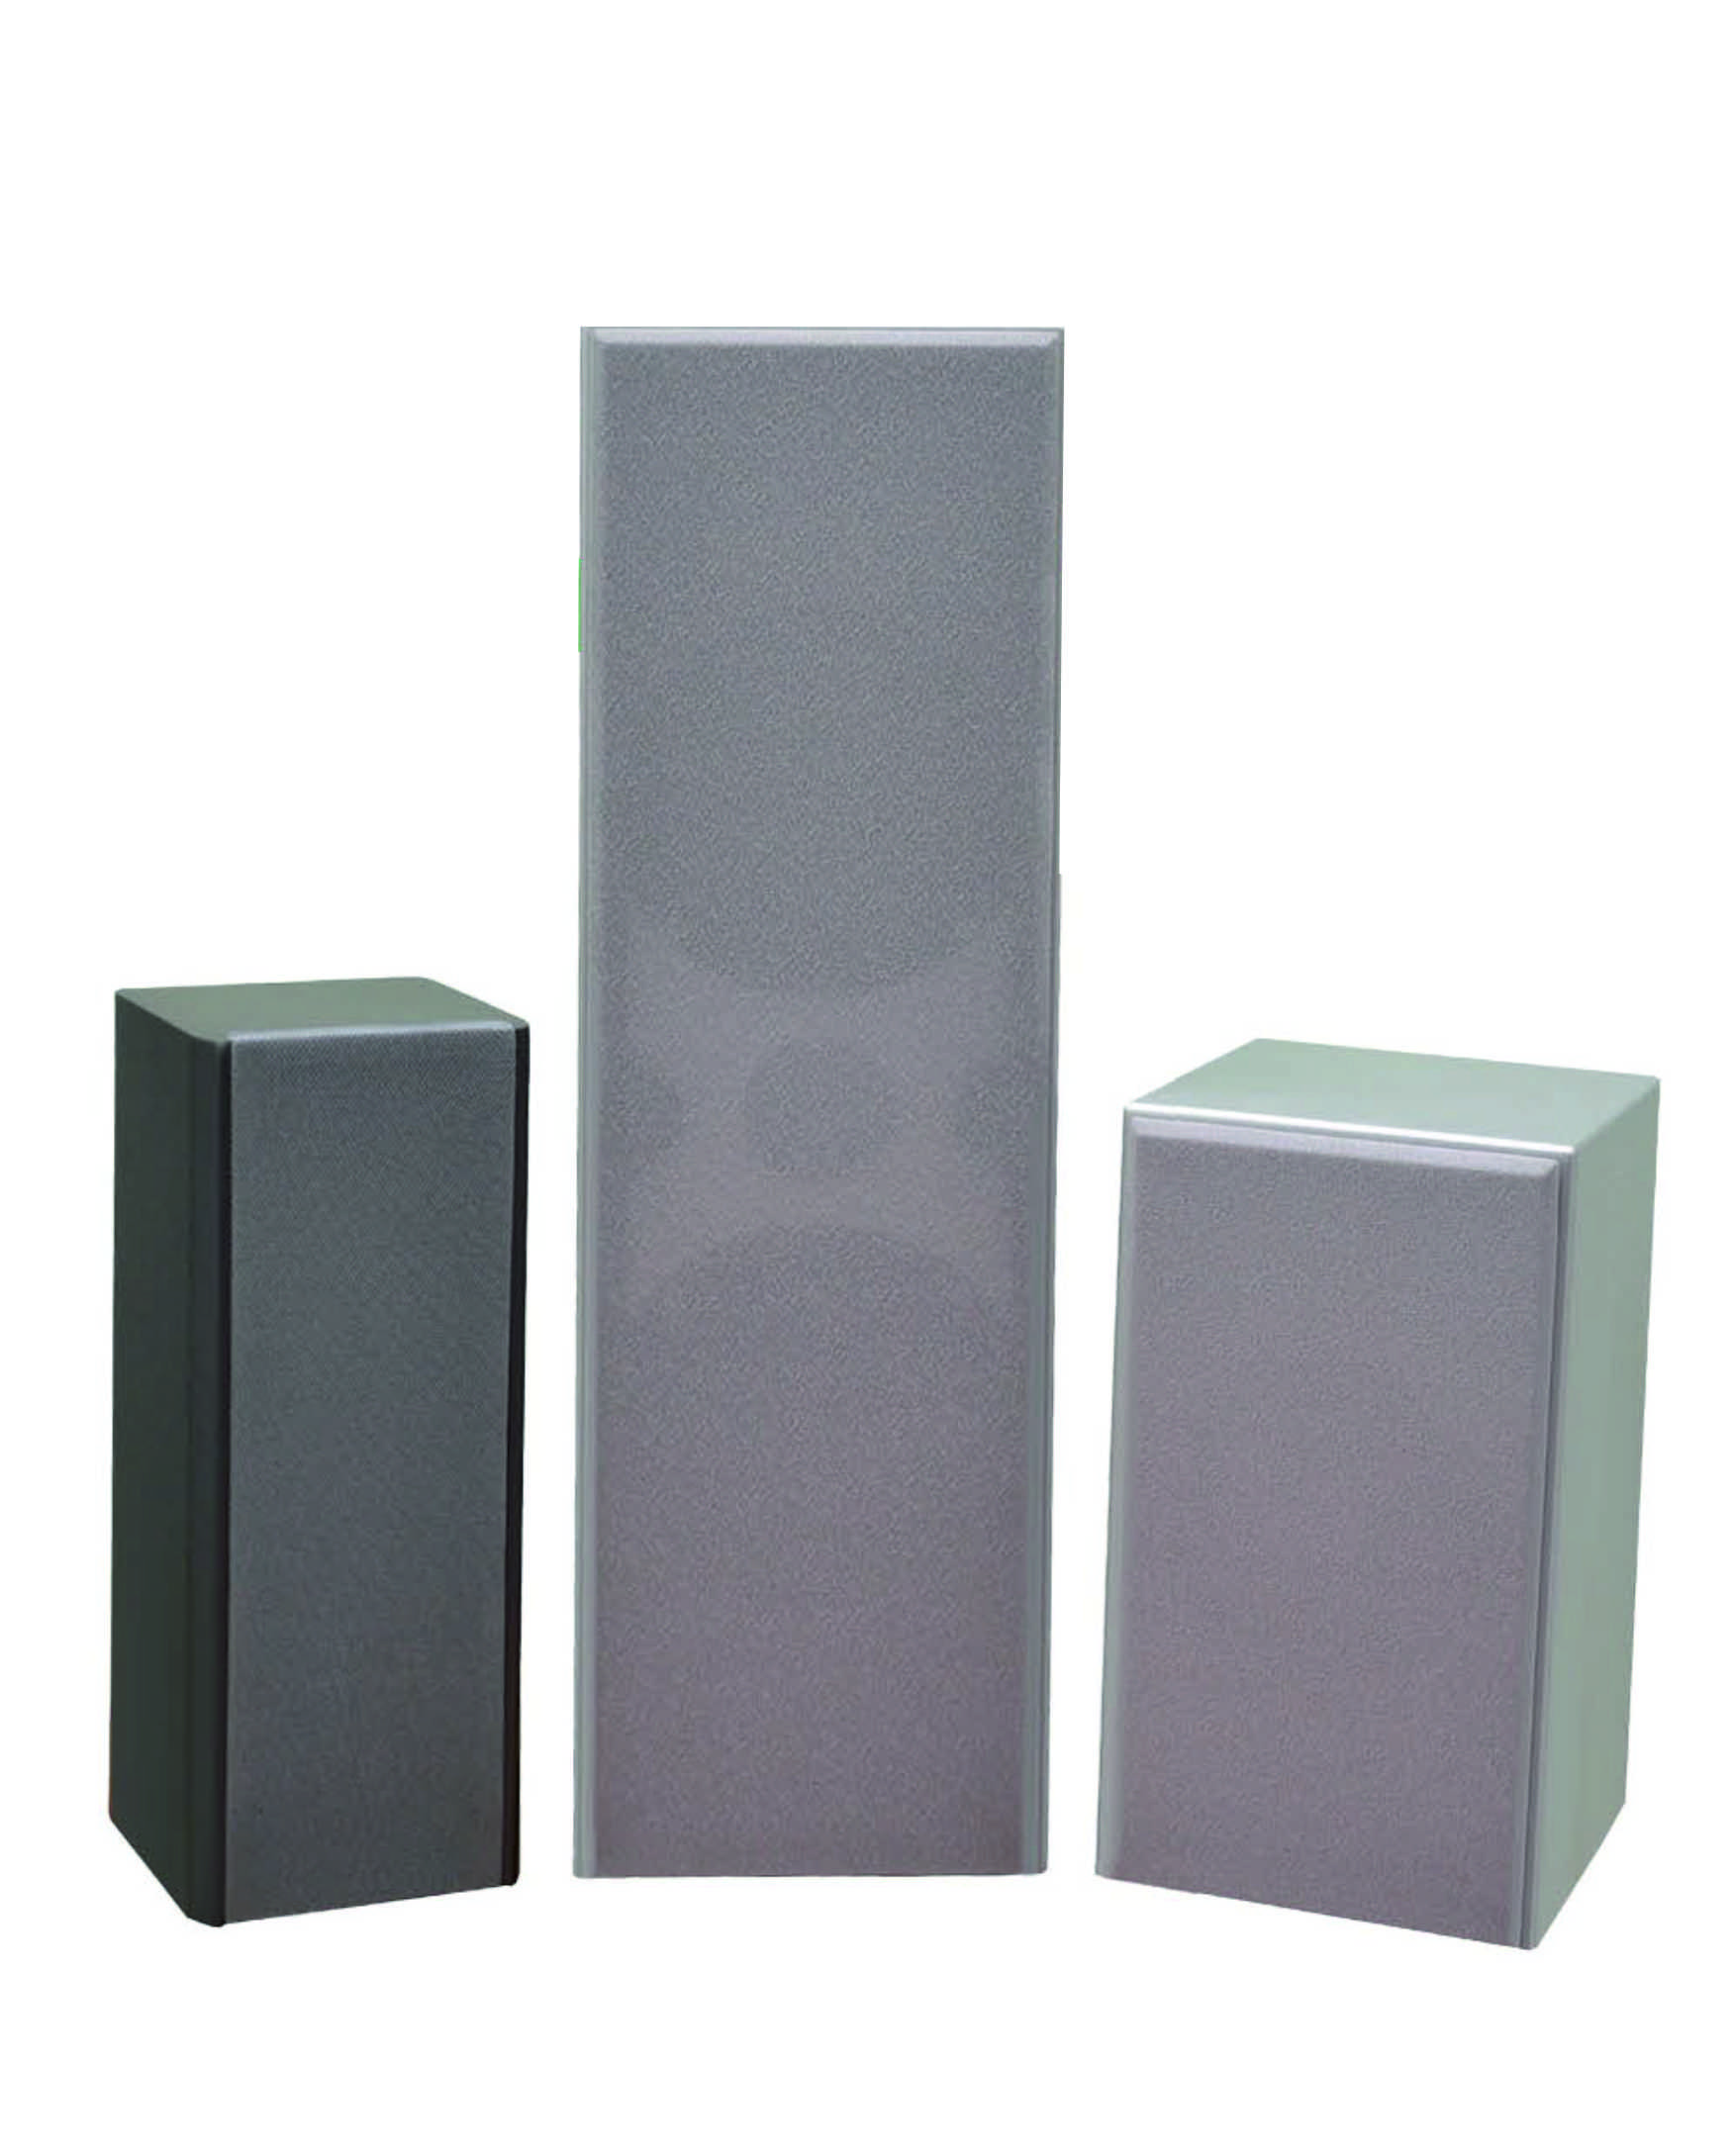 The acoustic system in the protected version of 